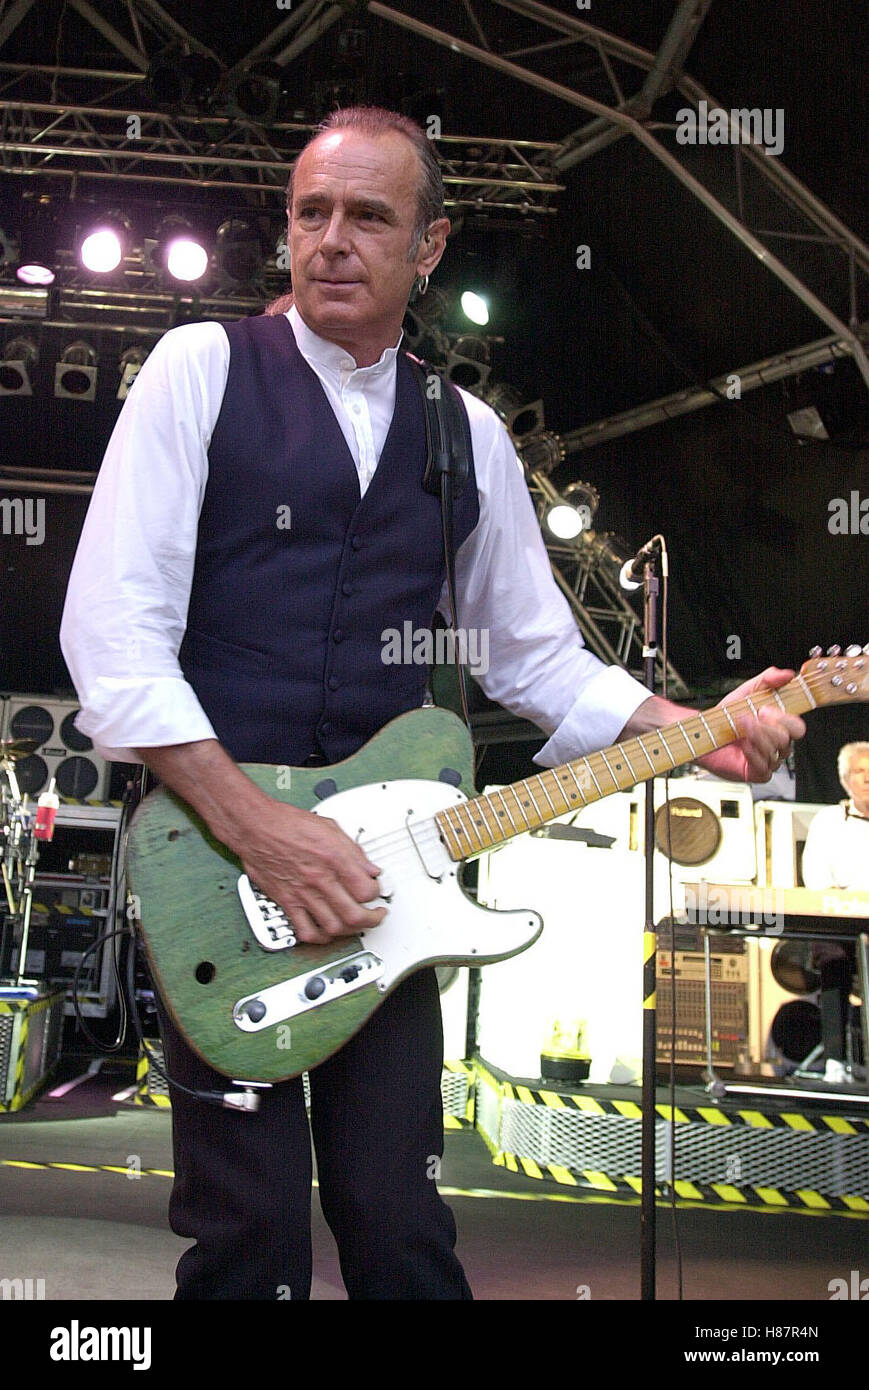 FRANCIS ROSSI STATUS QUO DALBY FOREST PICKERING N. YORKS 22. Juni 2003 Stockfoto